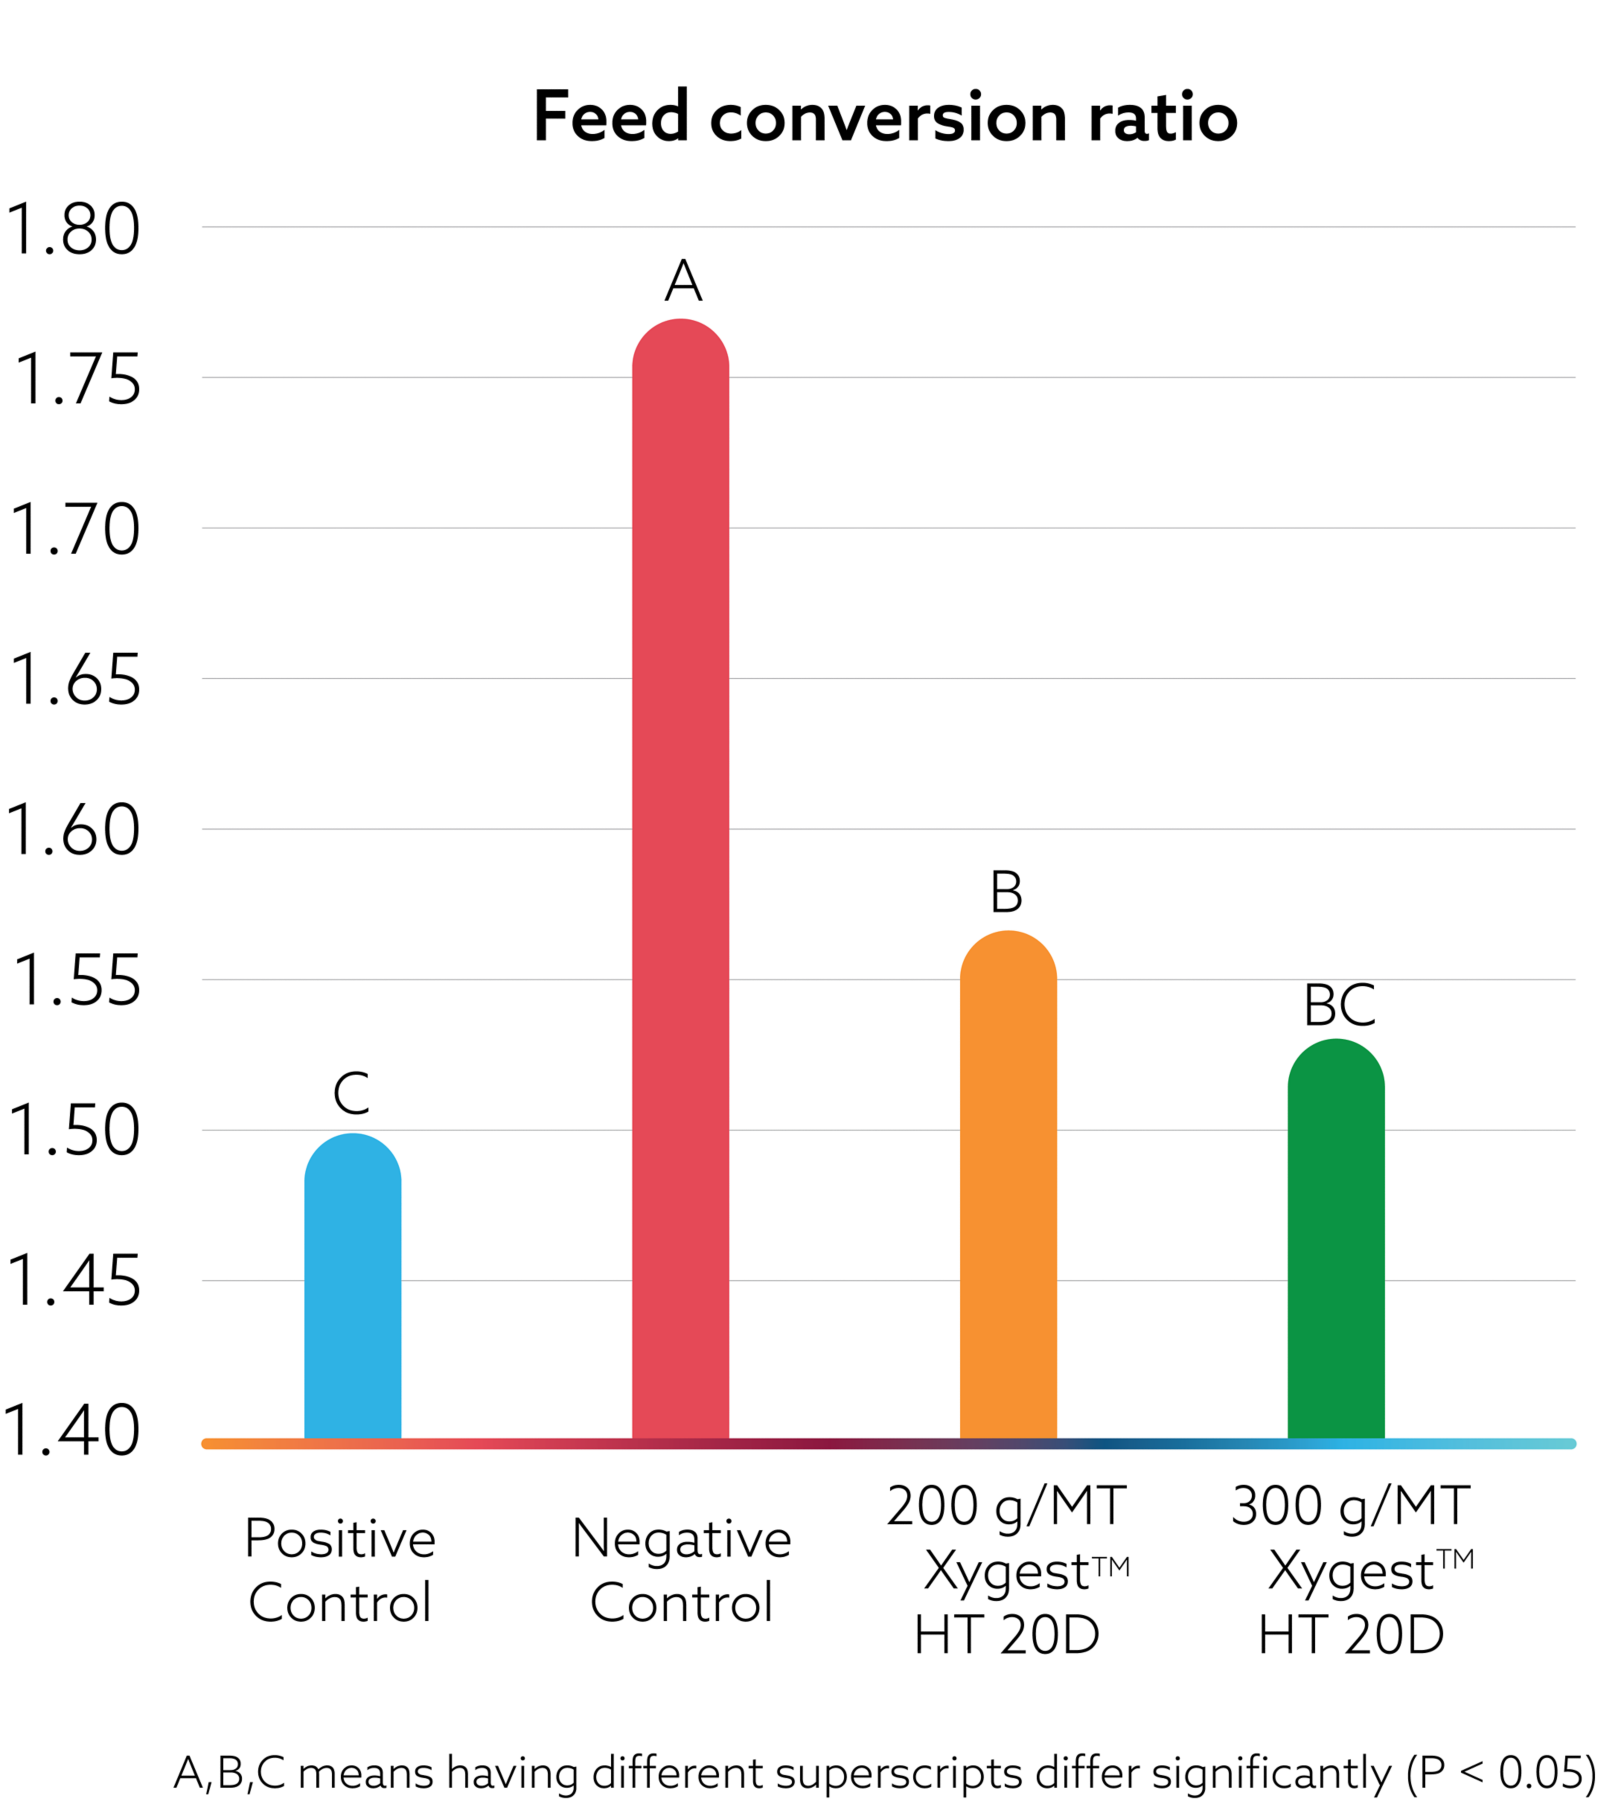 XYGEST HT KAA-Broiler Trial Data Feed Convertion Ratio graph